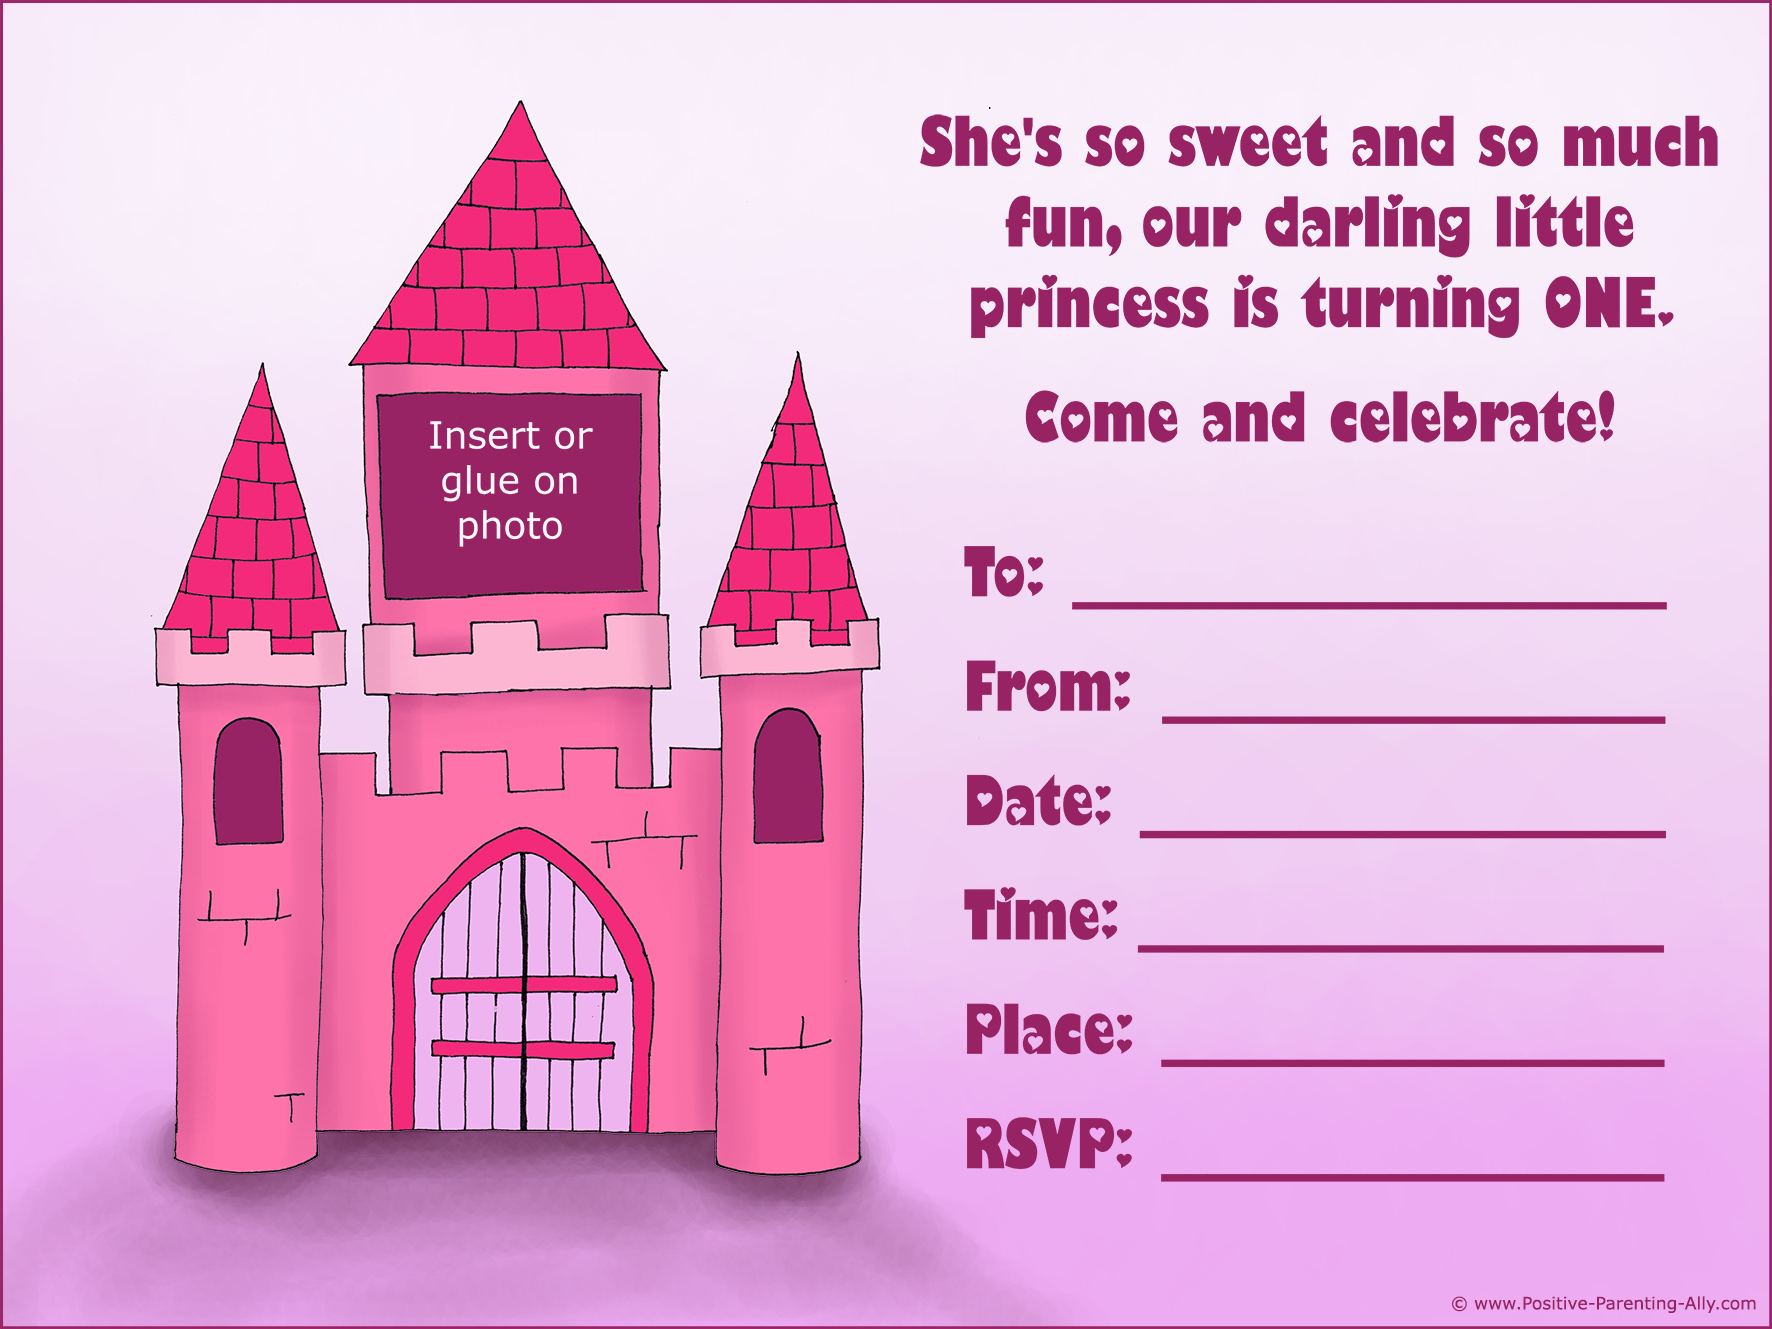 First birthday party invitations: The typical girl princess theme with a pink castle and a place to glue on photo.